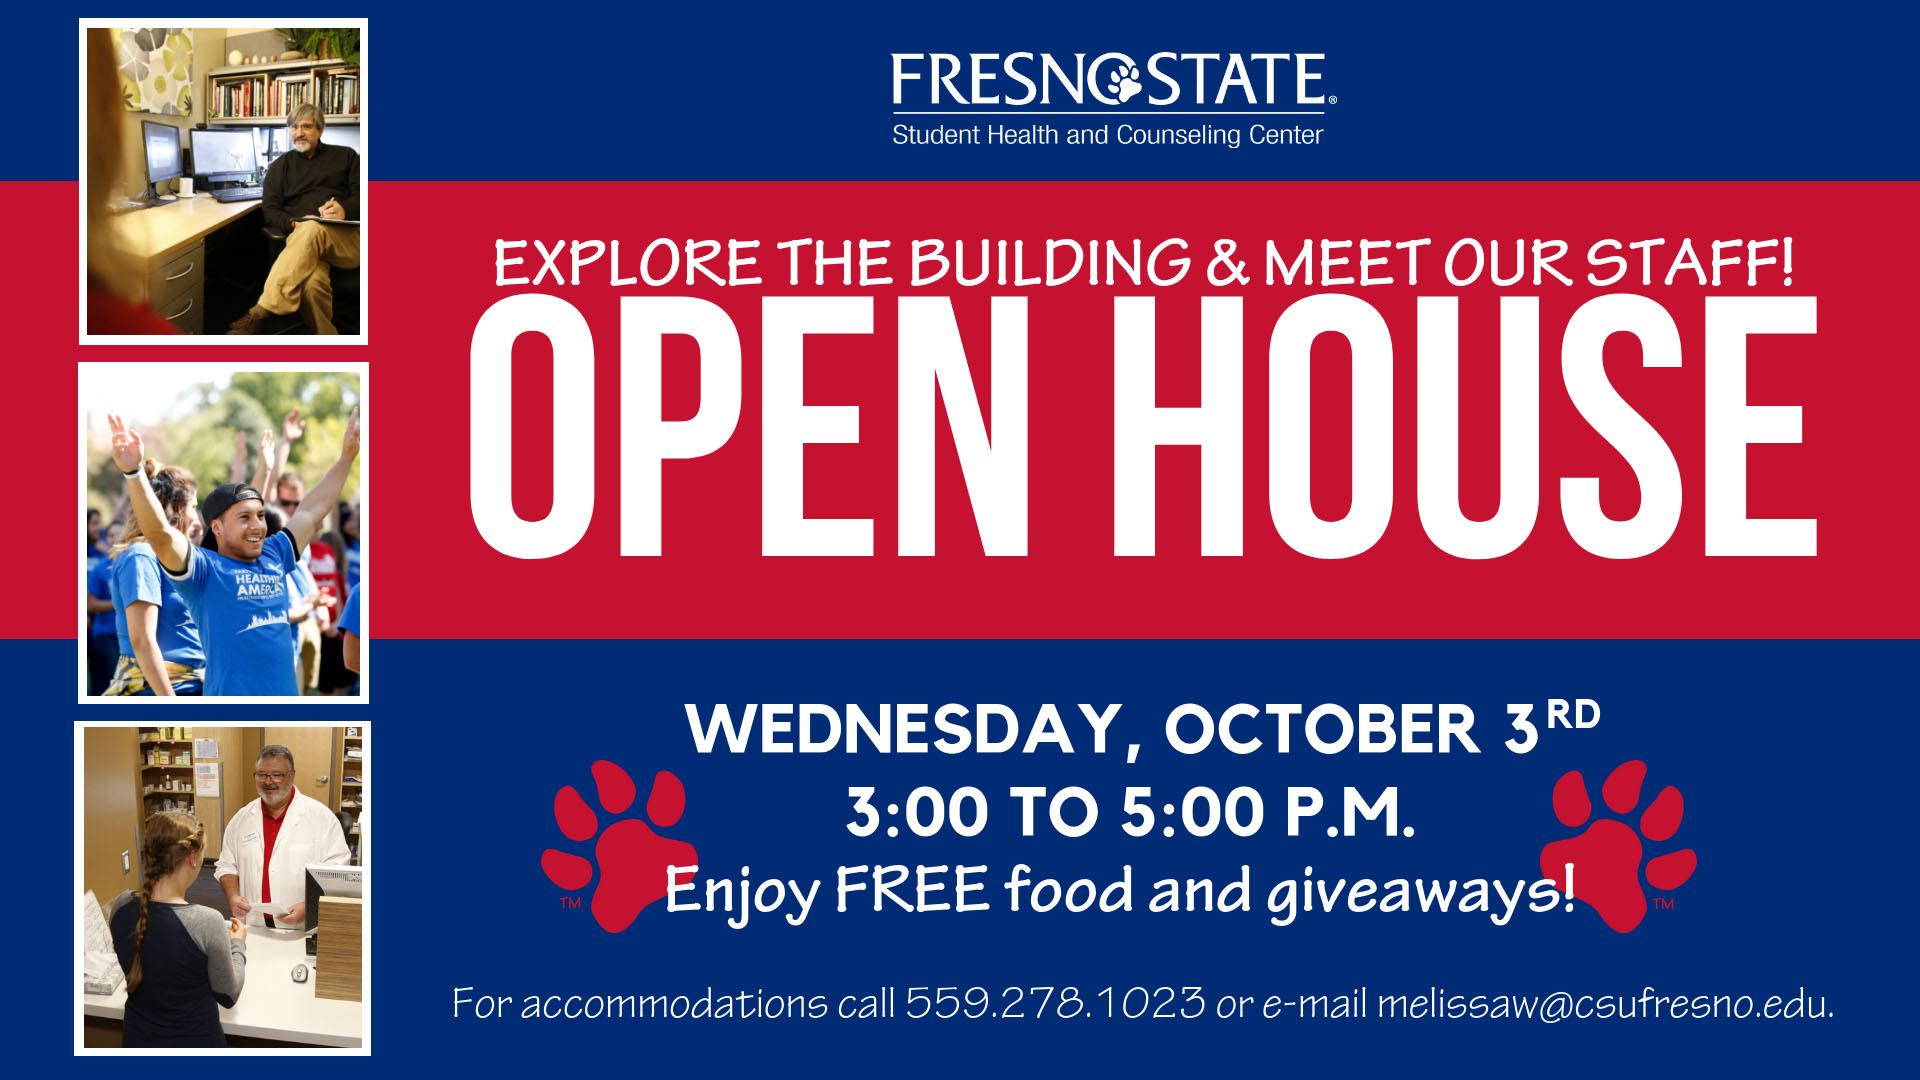 Healthy Bulldogs: Are you a student at Fresno State? Youre invited to this event